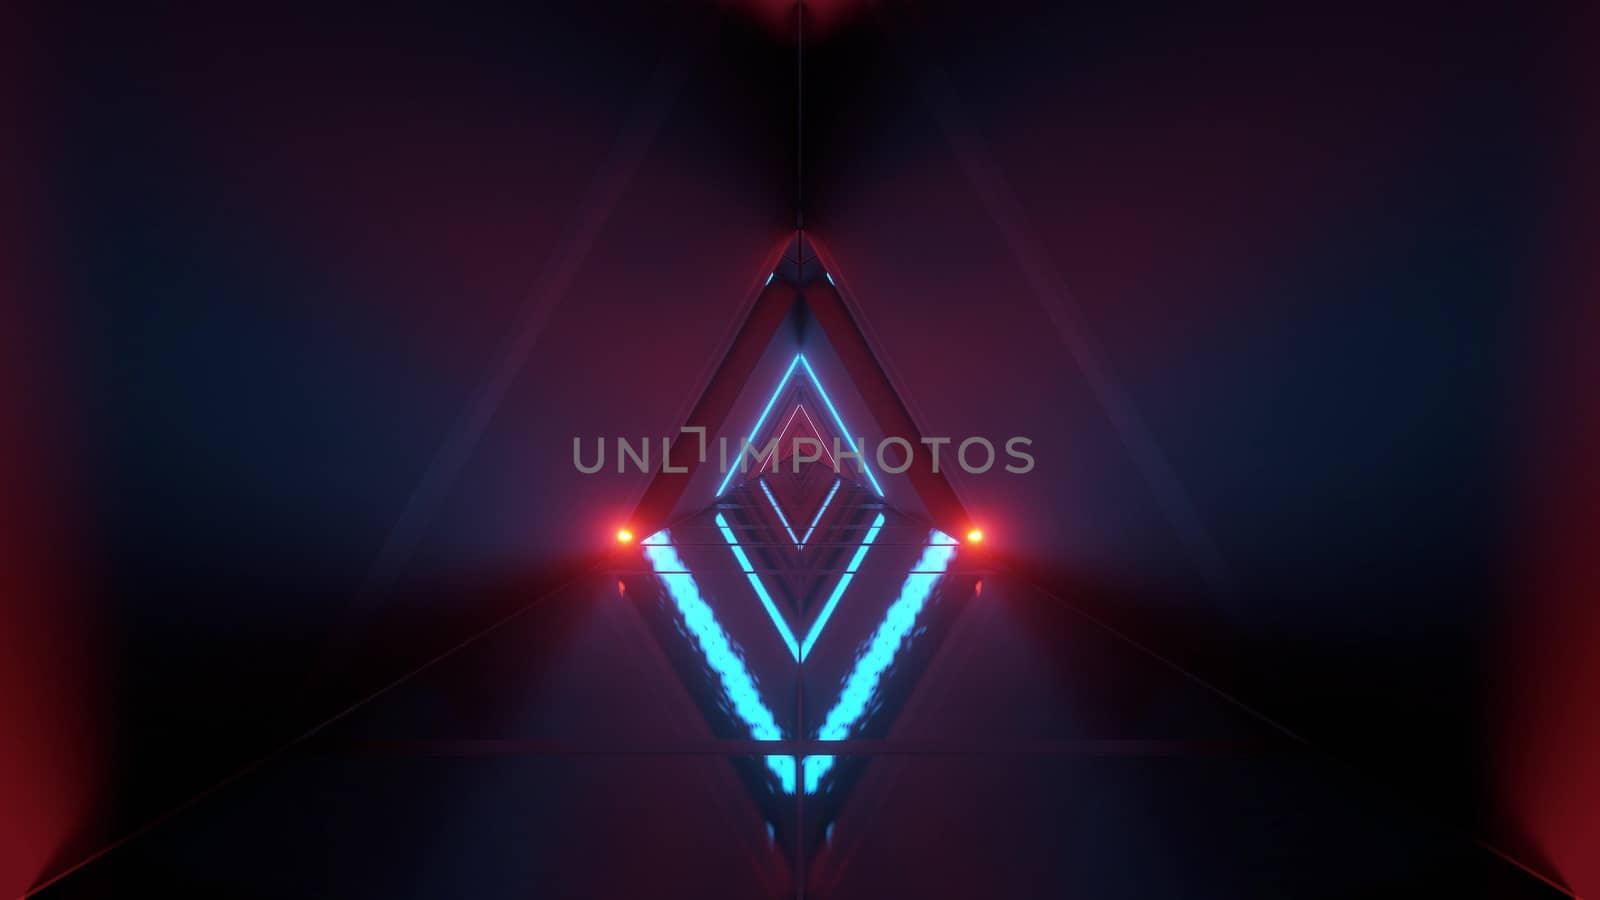 glowing triangle space ship temple tunnel corridor in futuristic sci-fi style with reflective glass bottom 3d illustration background wallpaper, future religion in space building 3d rendering graphic artwork design